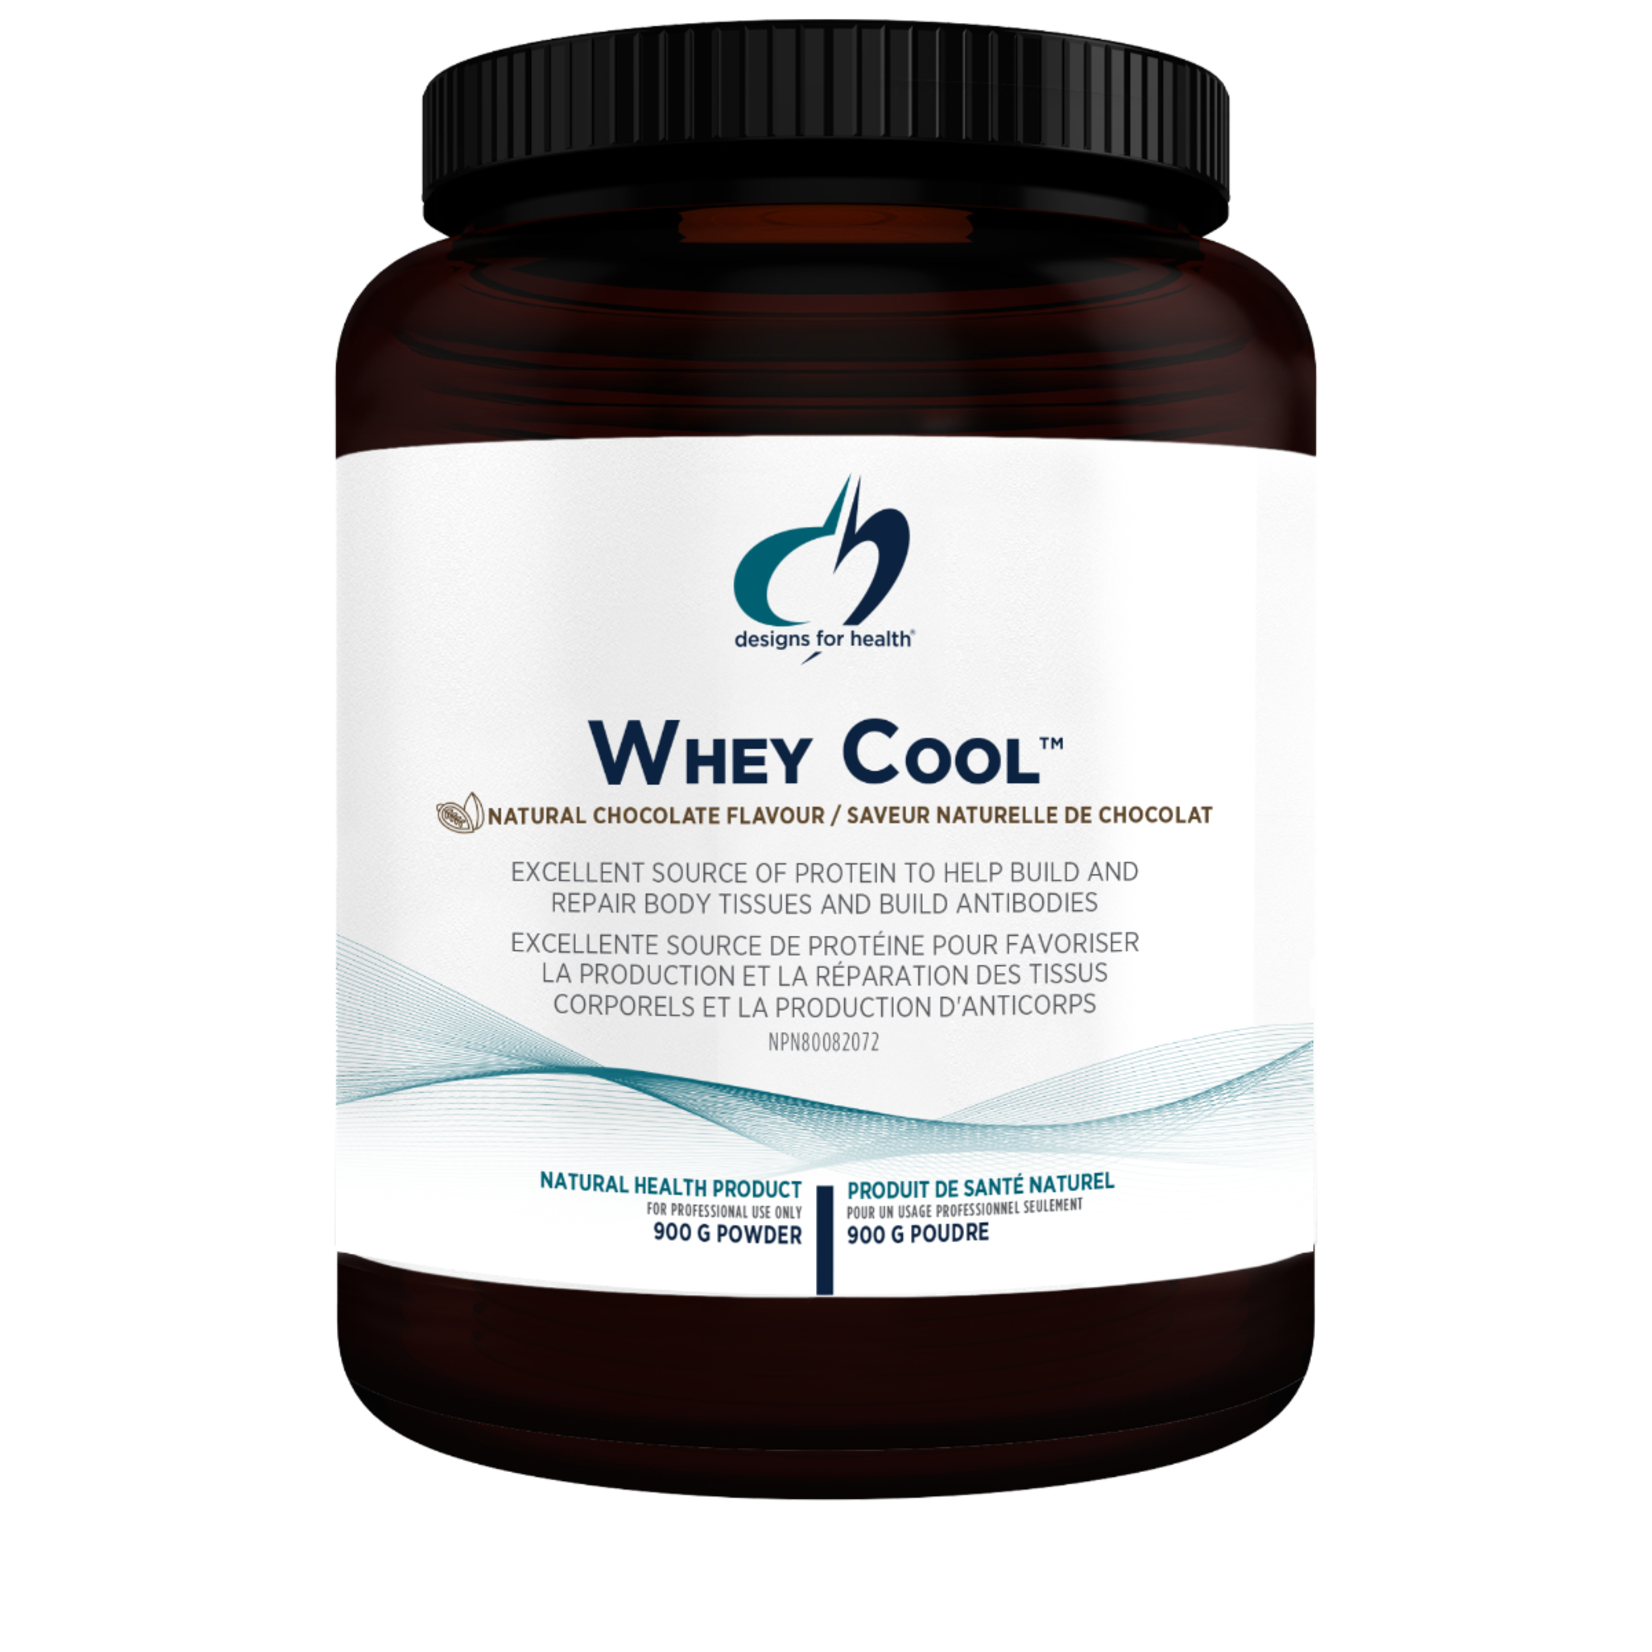 DESIGNS FOR HEALTH DESIGNS FOR HEALTH WHEY COOL CHOCOLATE POWDER 900G